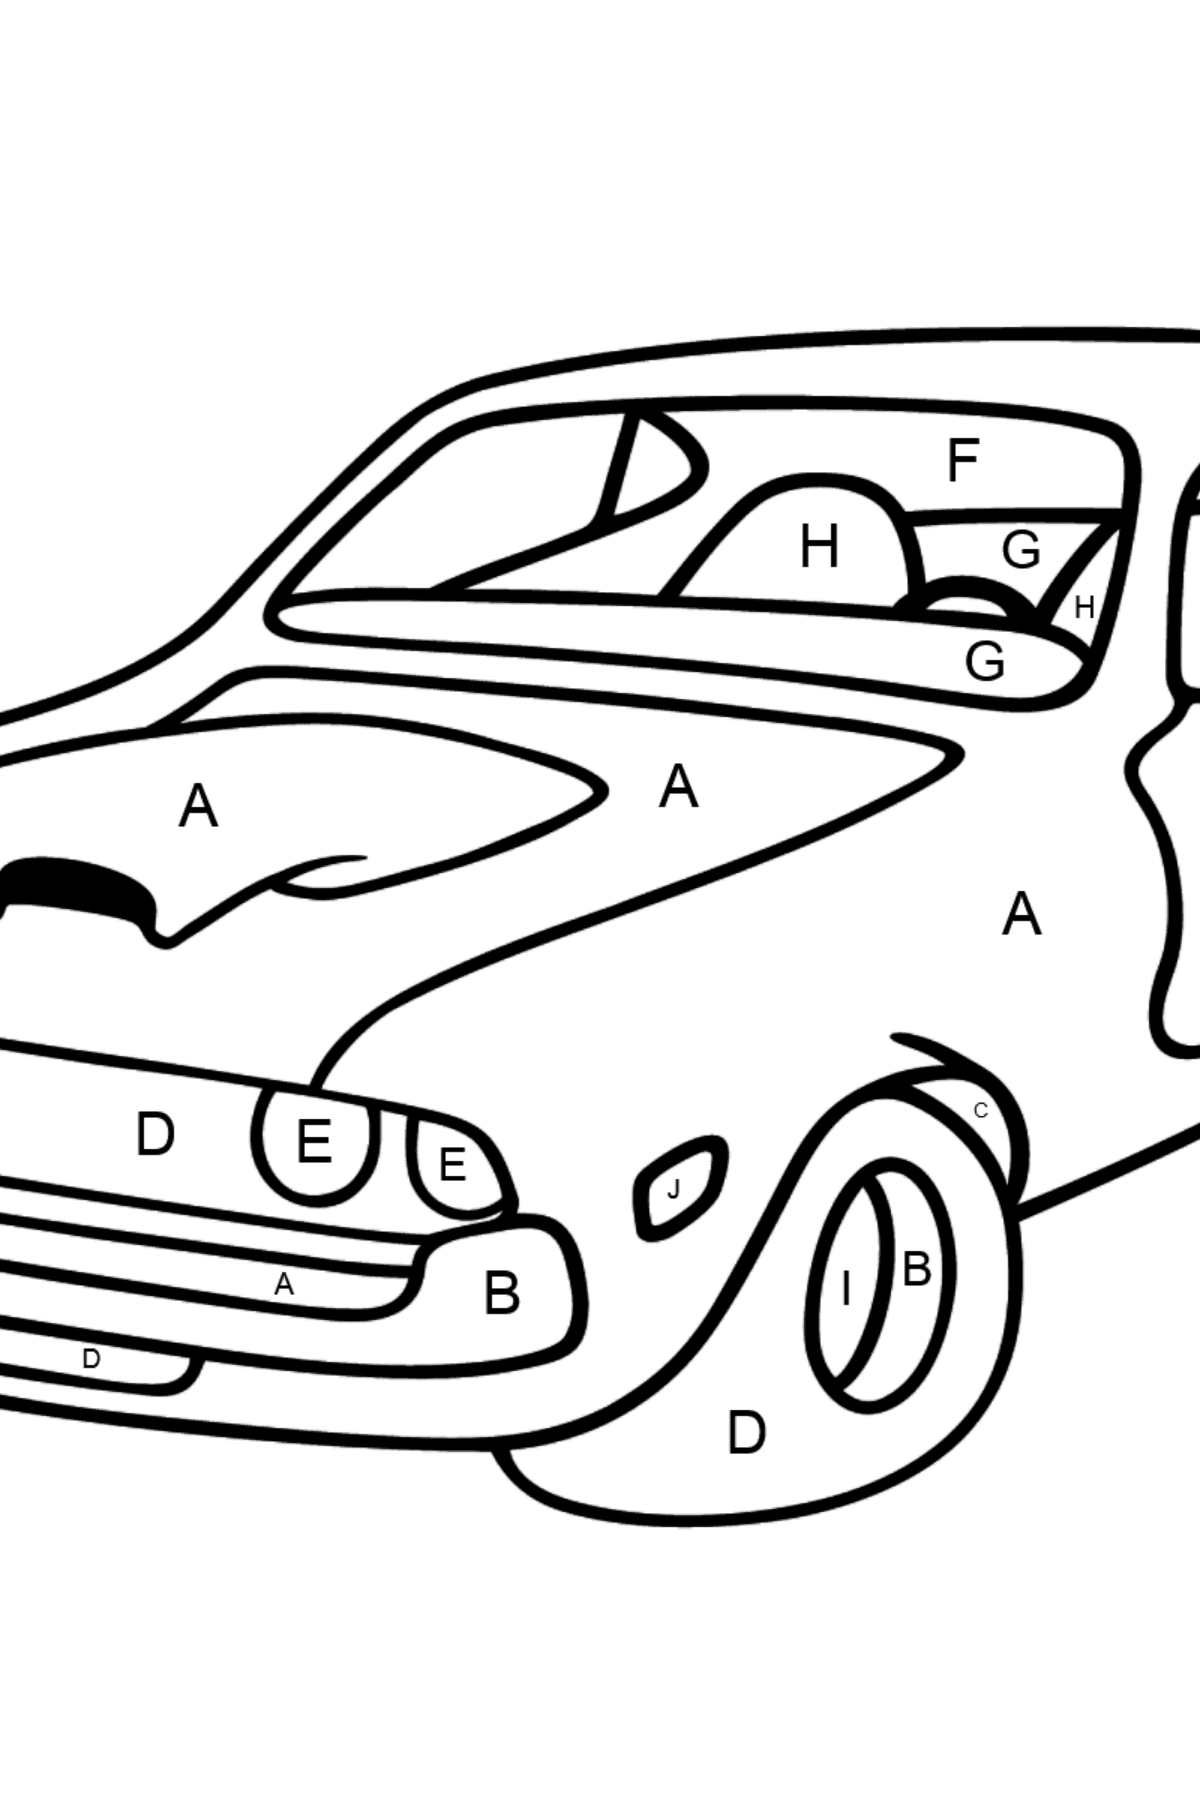 Chevrolet-Chevy Sports Car coloring page - Coloring by Letters for Kids